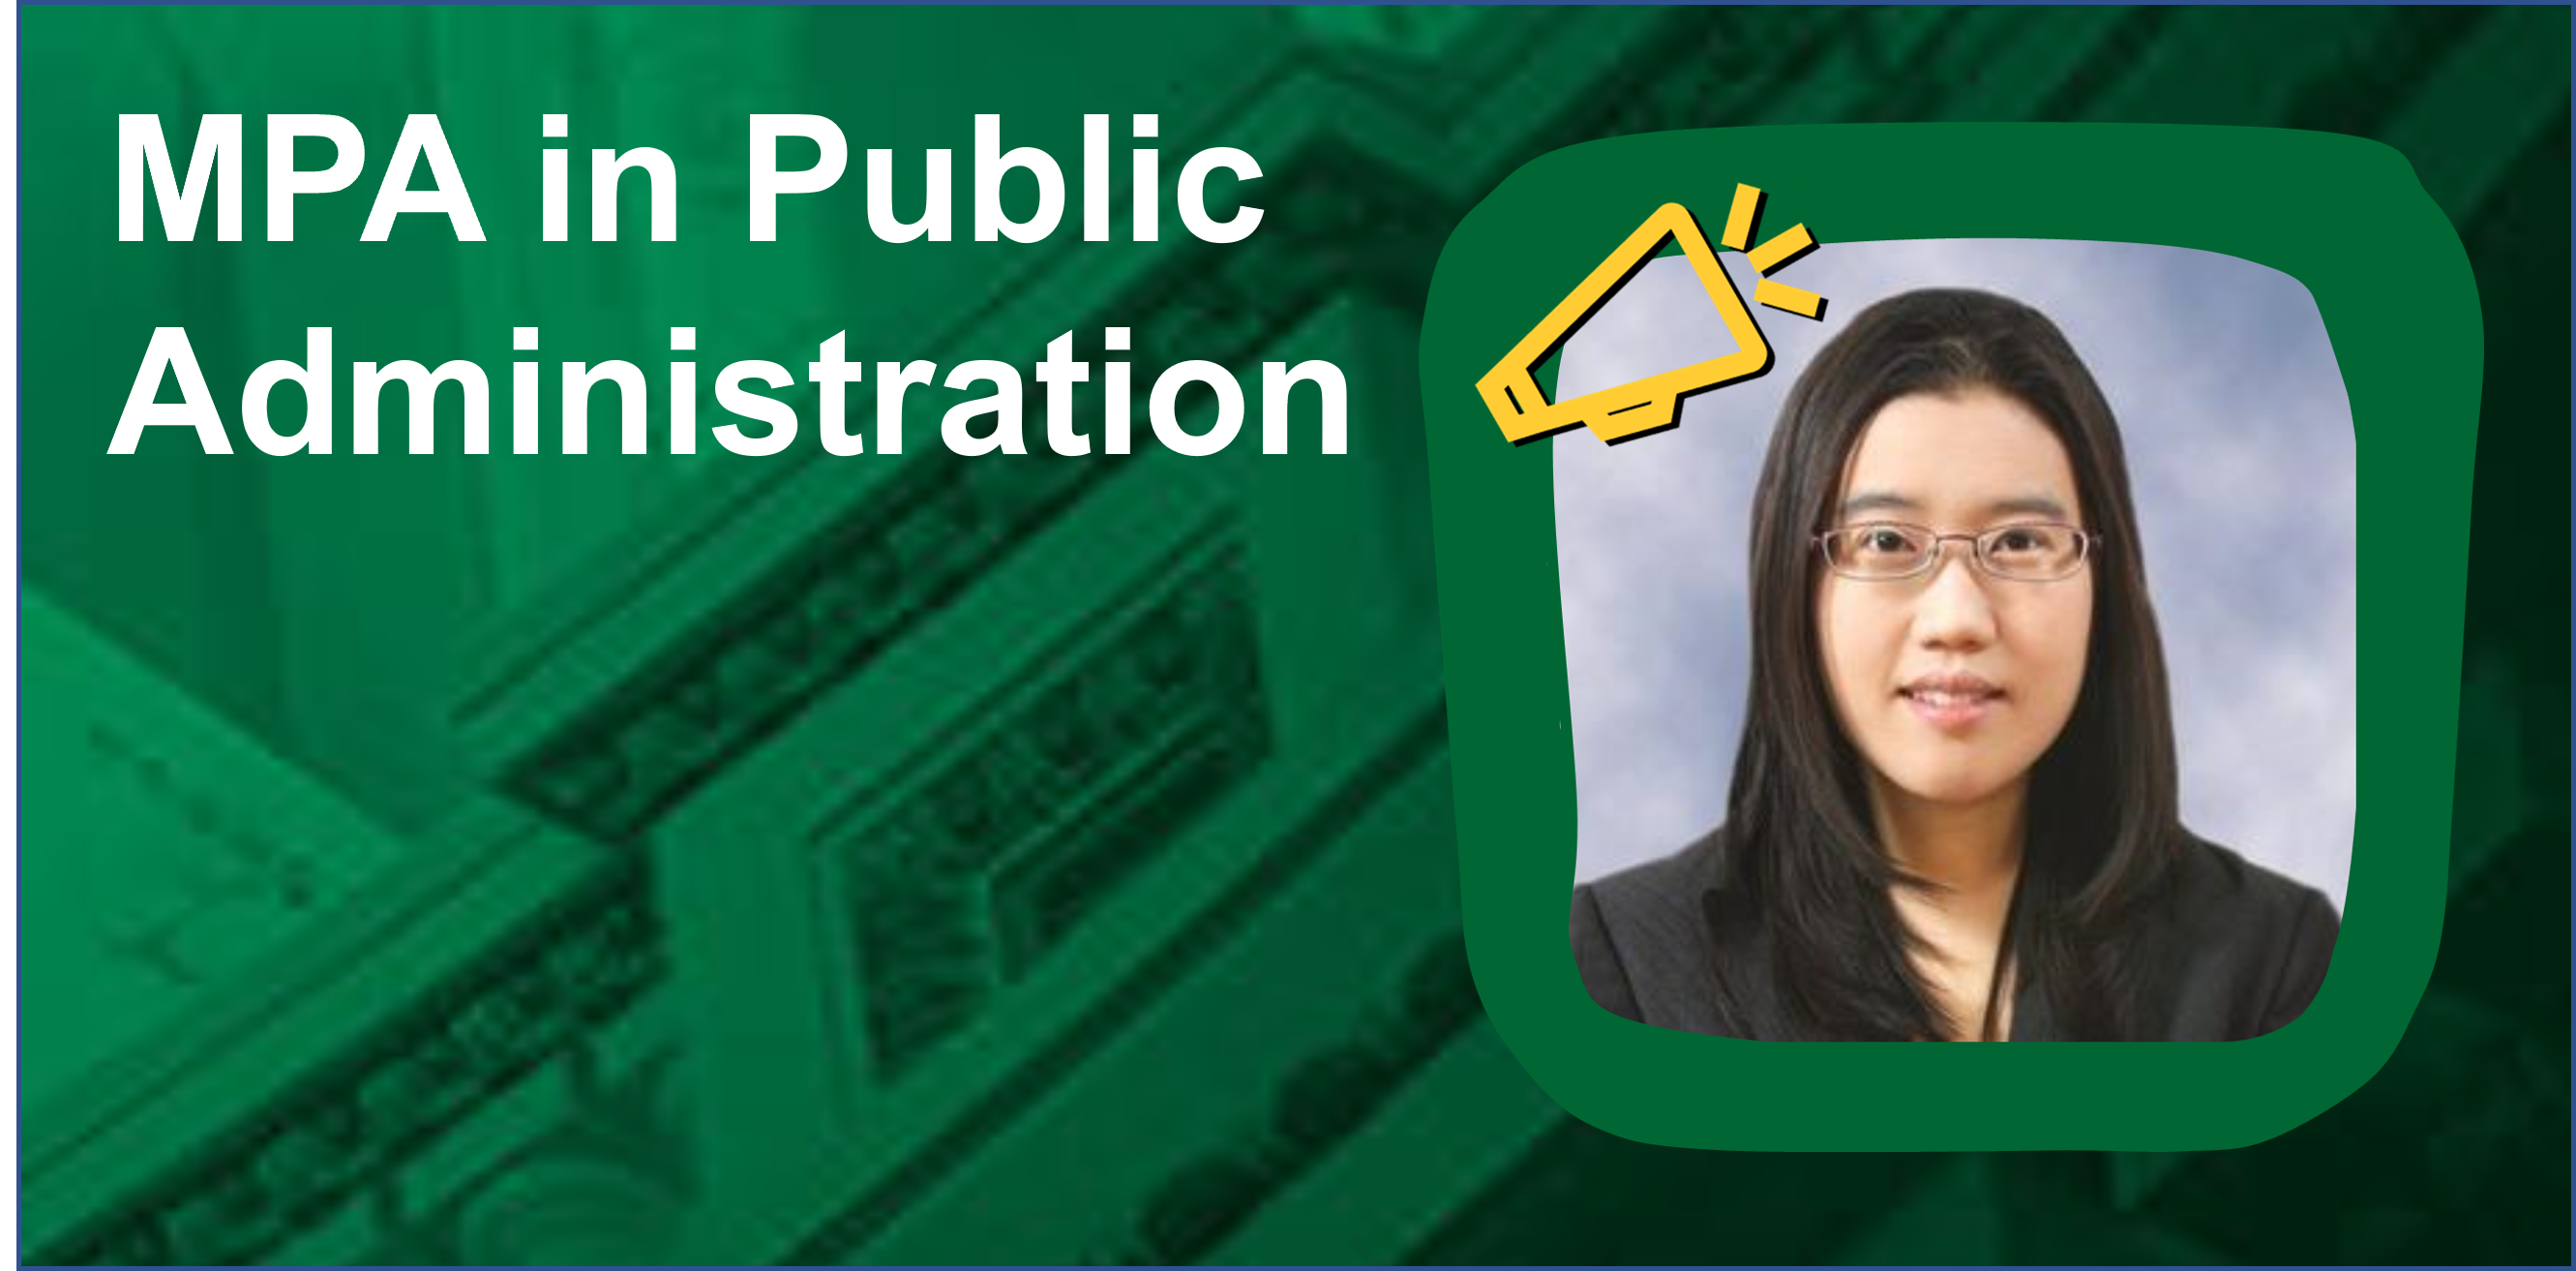 Mirae Kim is the new Director of GMU’s Master of Public Administration Program